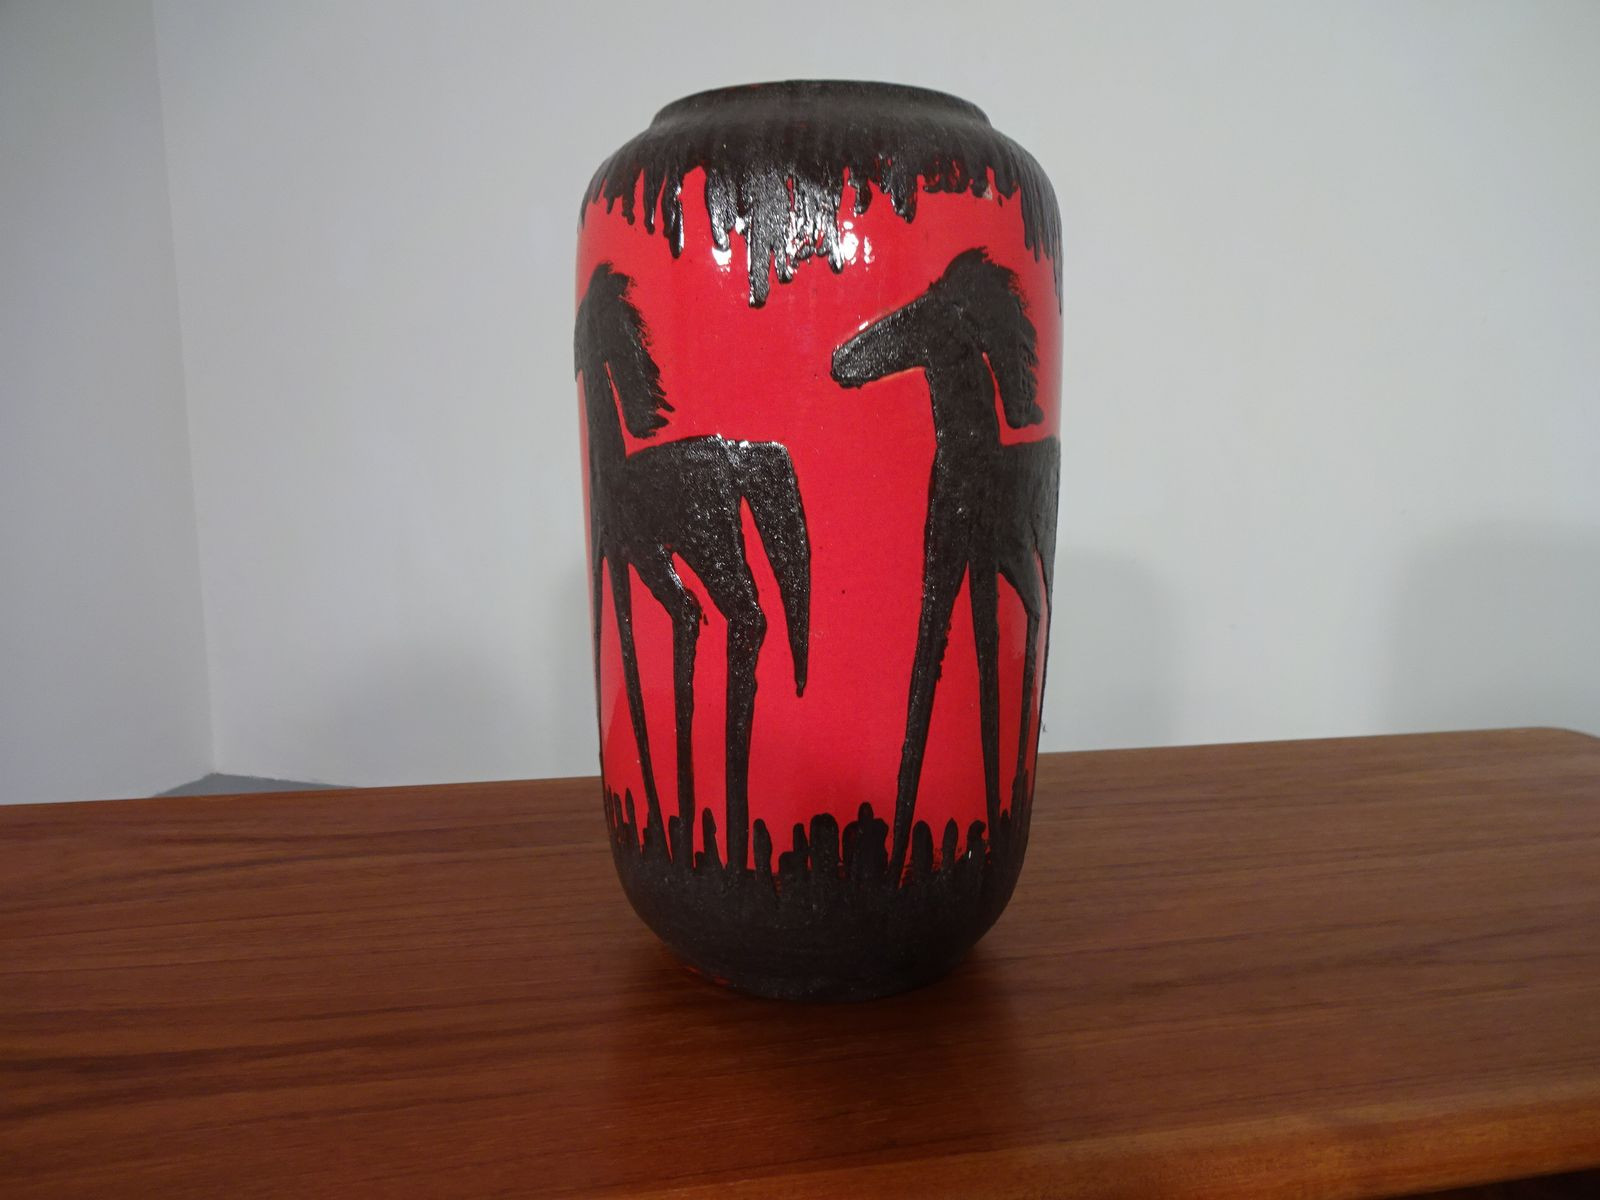 26 Recommended Tall Black Vases for Sale 2024 free download tall black vases for sale of large horses ceramic vase from scheurich 1970s for sale at pamono within price 388 00 regular price 485 00